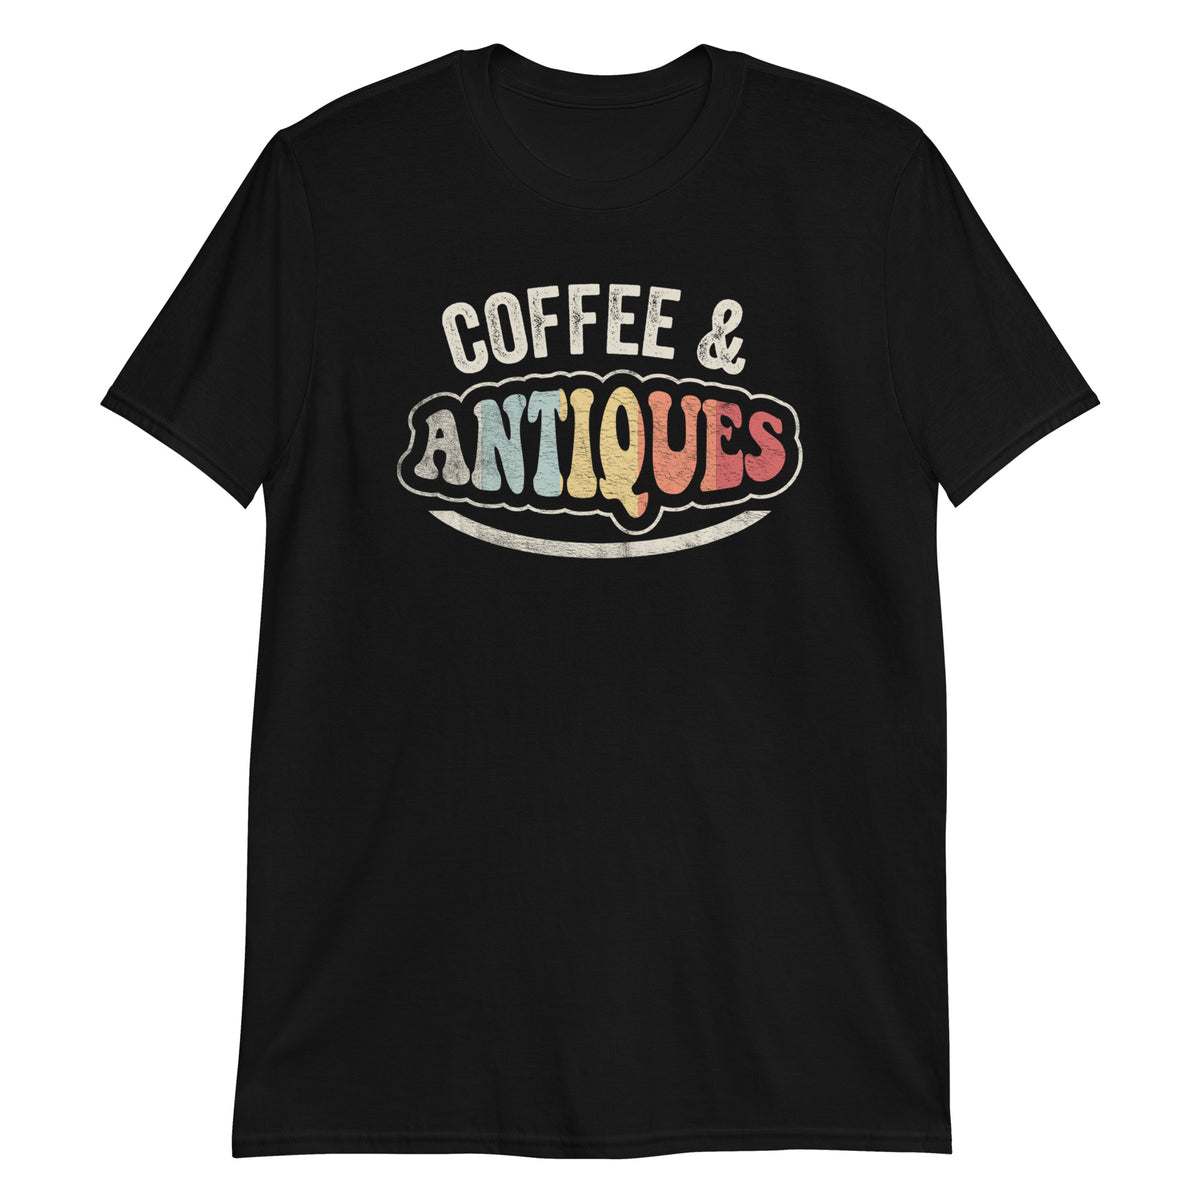 Coffee and Antiques Antique Lover Retro Vintage Style T-Shirt